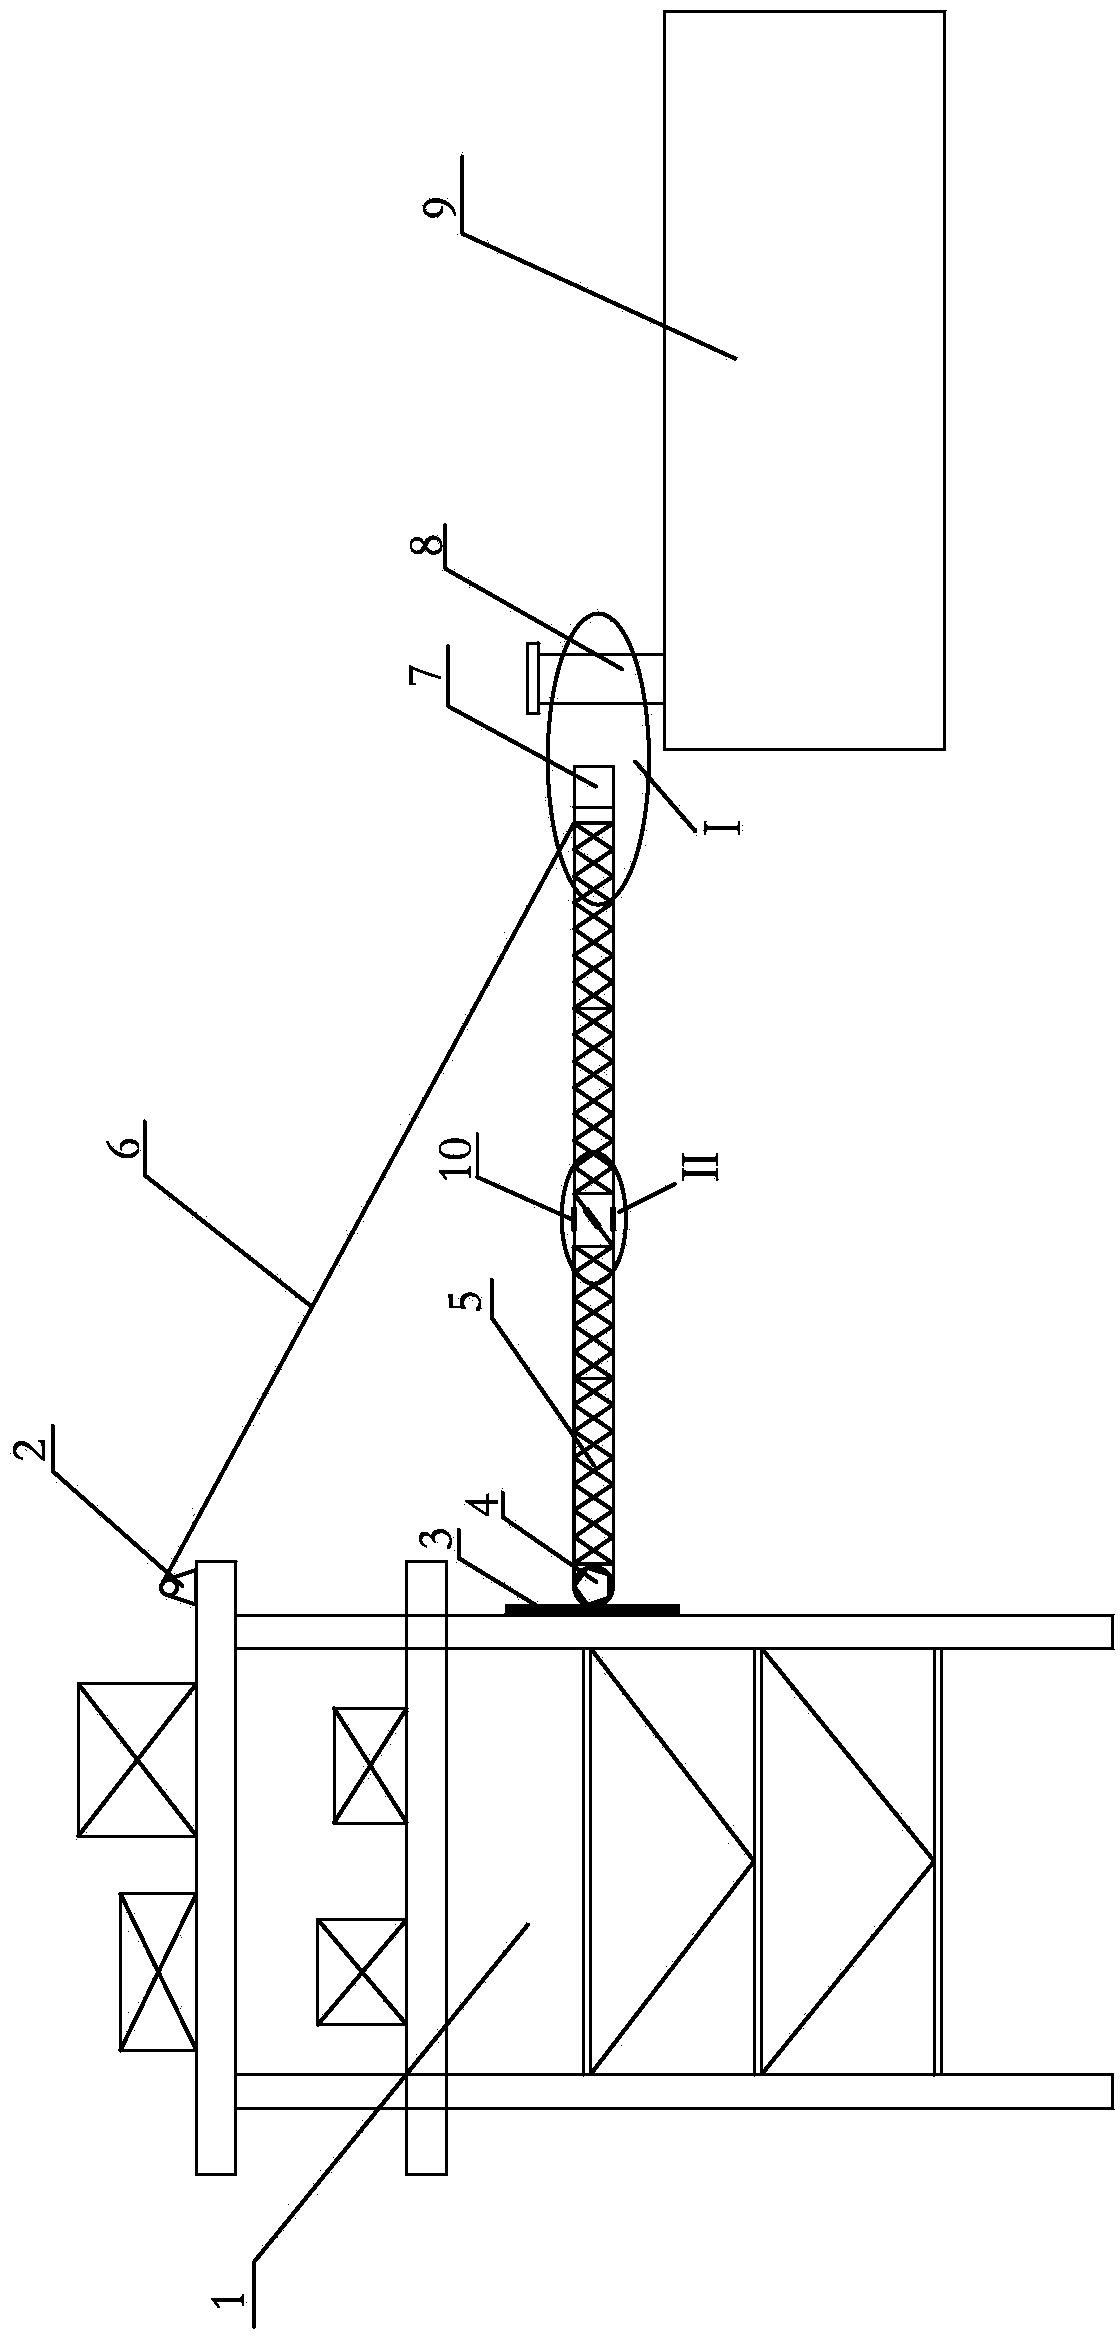 Cantilever-type slidable anti-collision connection device for ship berthing platform